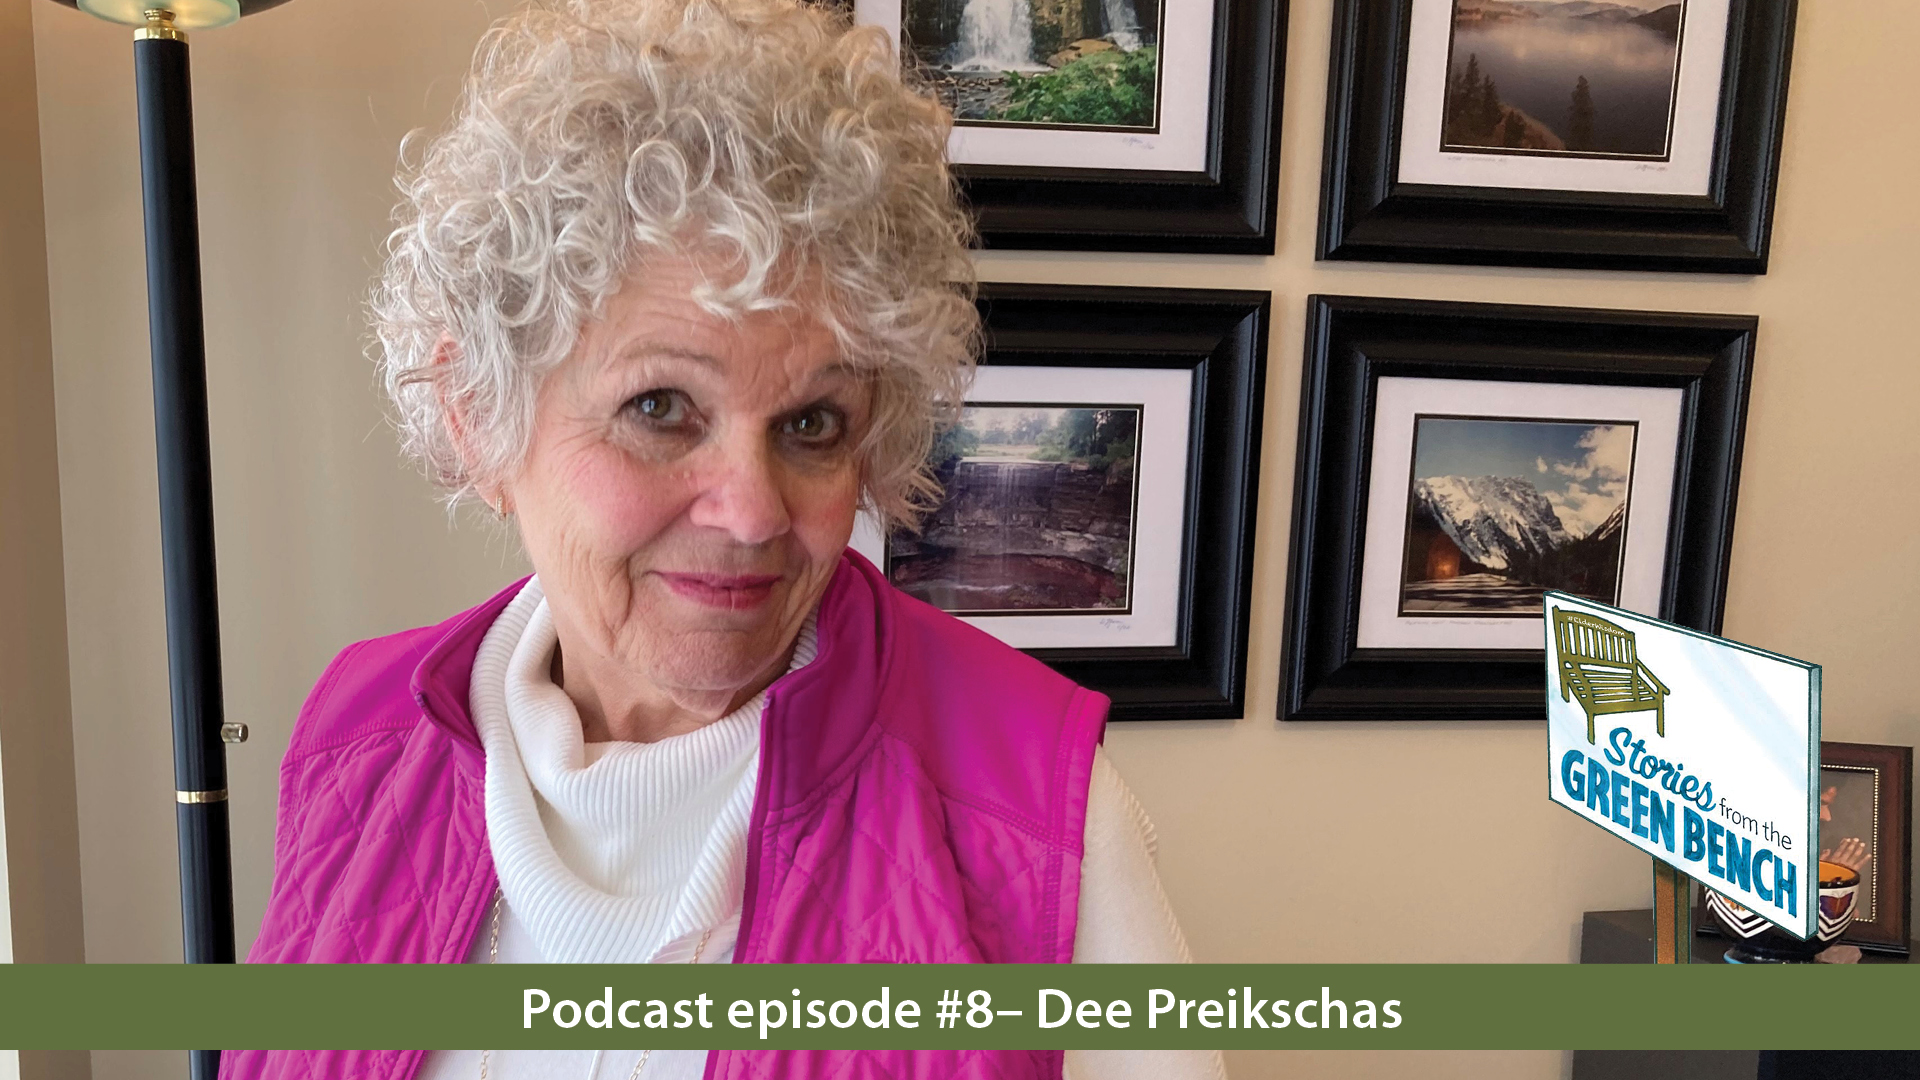 Dee Preikschas on the #ElderWisdom | Stories from the Green Bench podcast